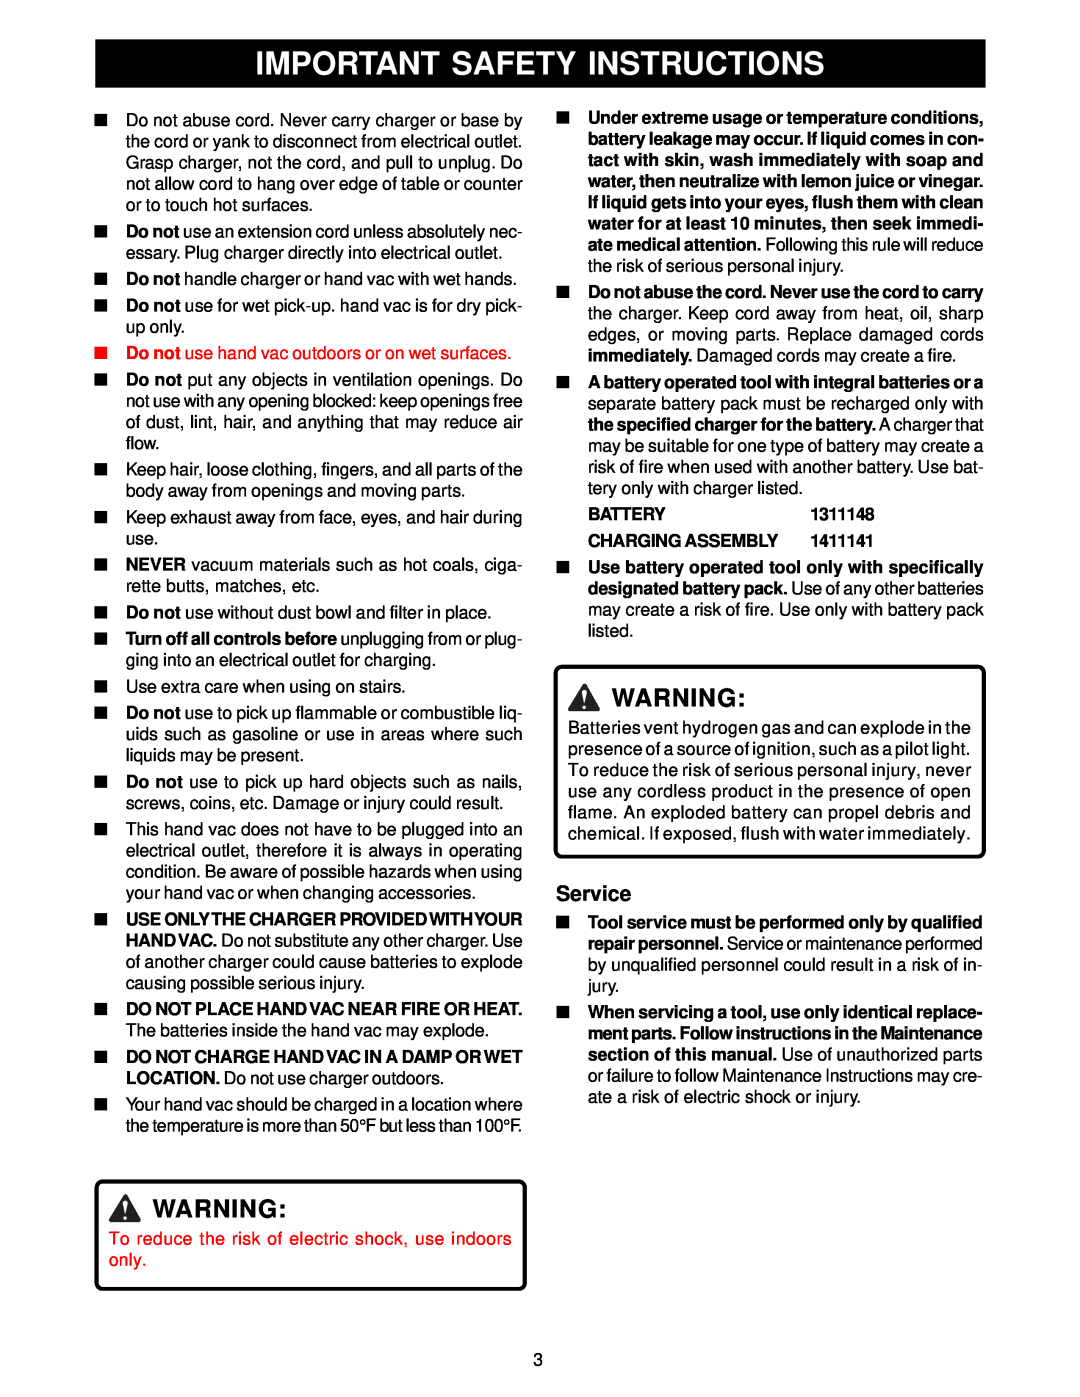 Ryobi VC120 manual Important Safety Instructions, Service, Do not use hand vac outdoors or on wet surfaces 